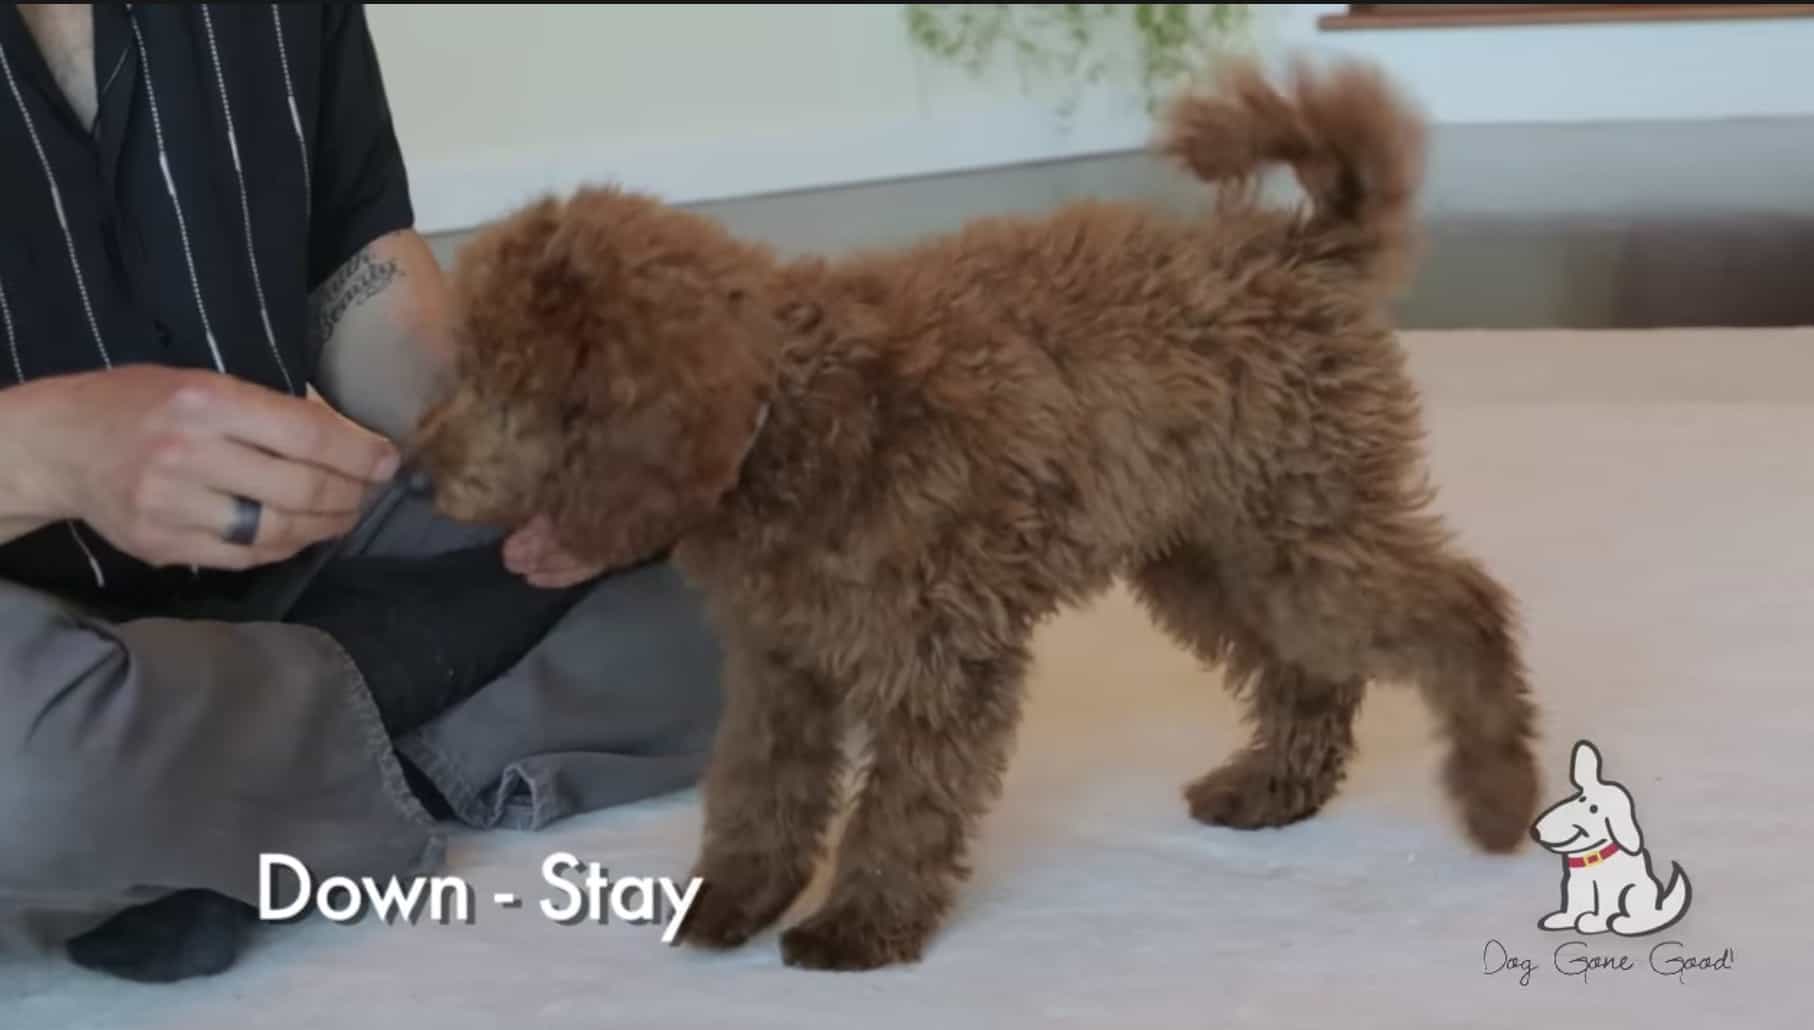 How to Teach Down-Stay to a Puppy